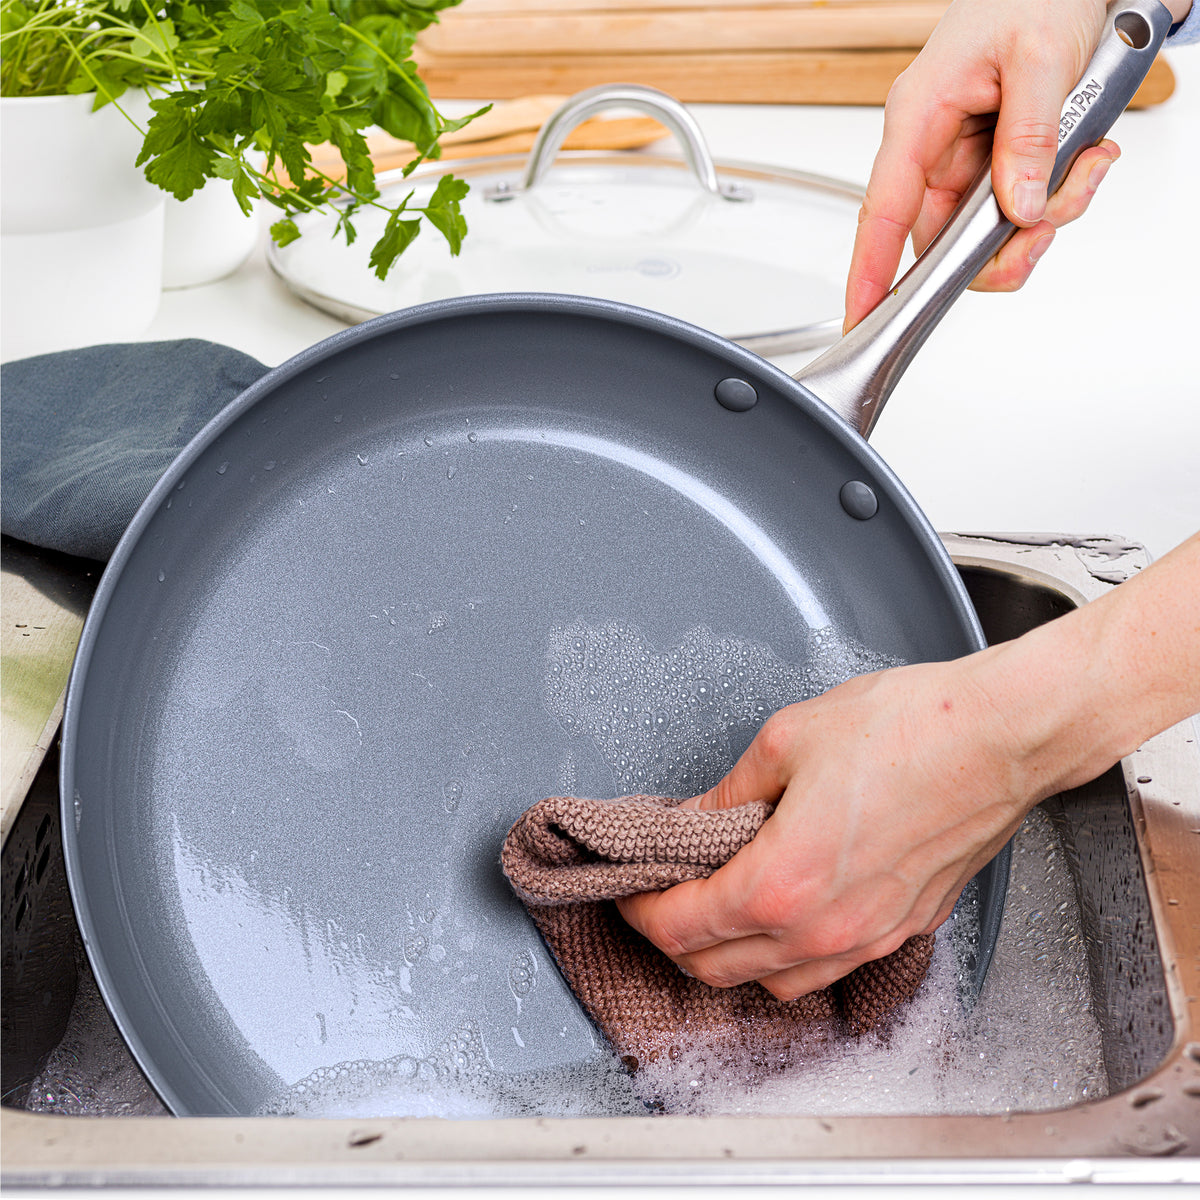 Best Non Stick Frying Pans: Tefal vs GreenPan vs other brands - Which?